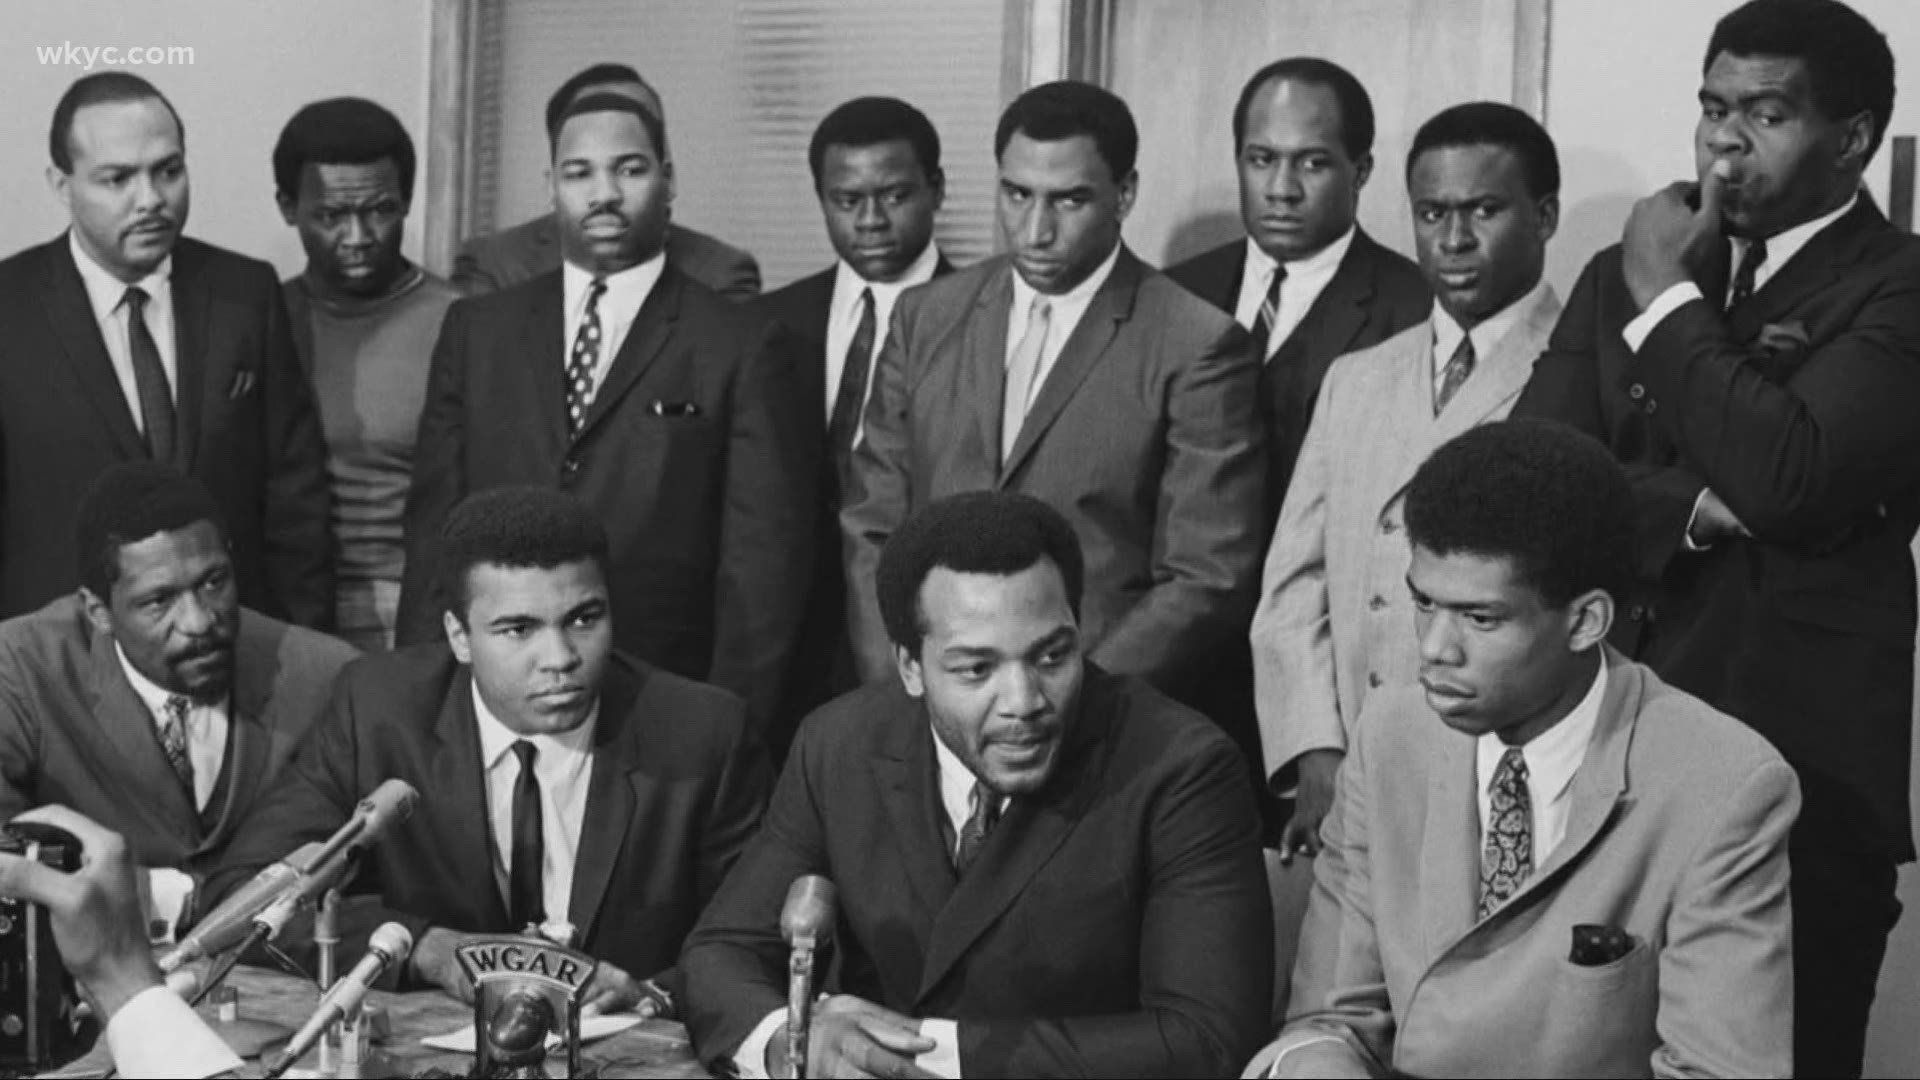 In 1967, Cleveland was spotlighted in the Black political landscape. Leon Bibb talks about the historic meeting between Muhammad Ali, Jim Brown and many others.